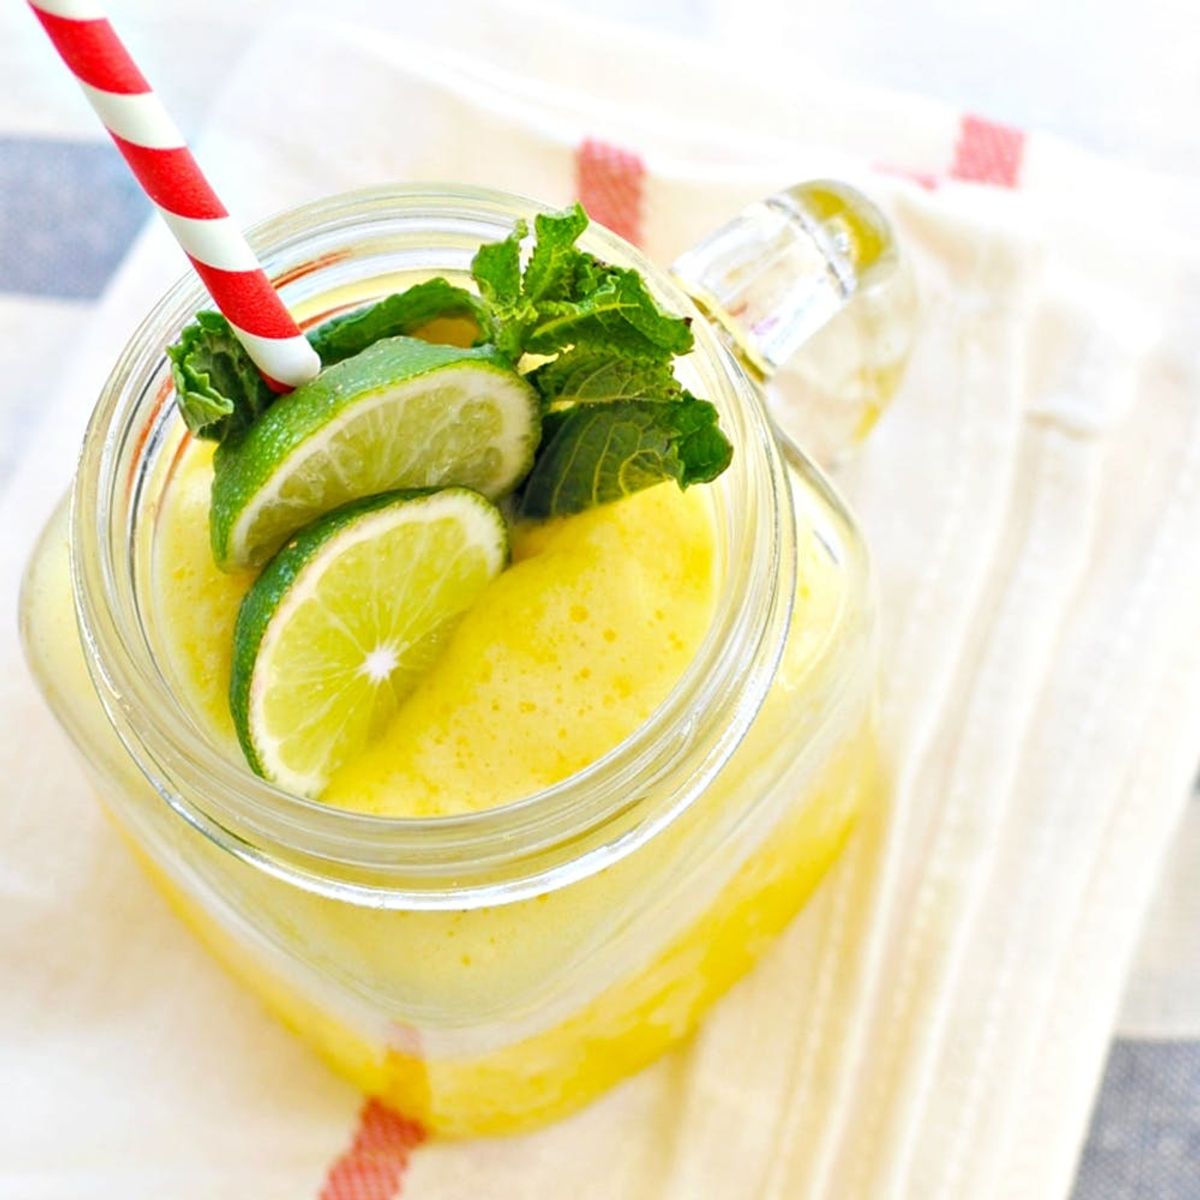 12 Aguas Frescas Recipes to Make Drinking Water a Party